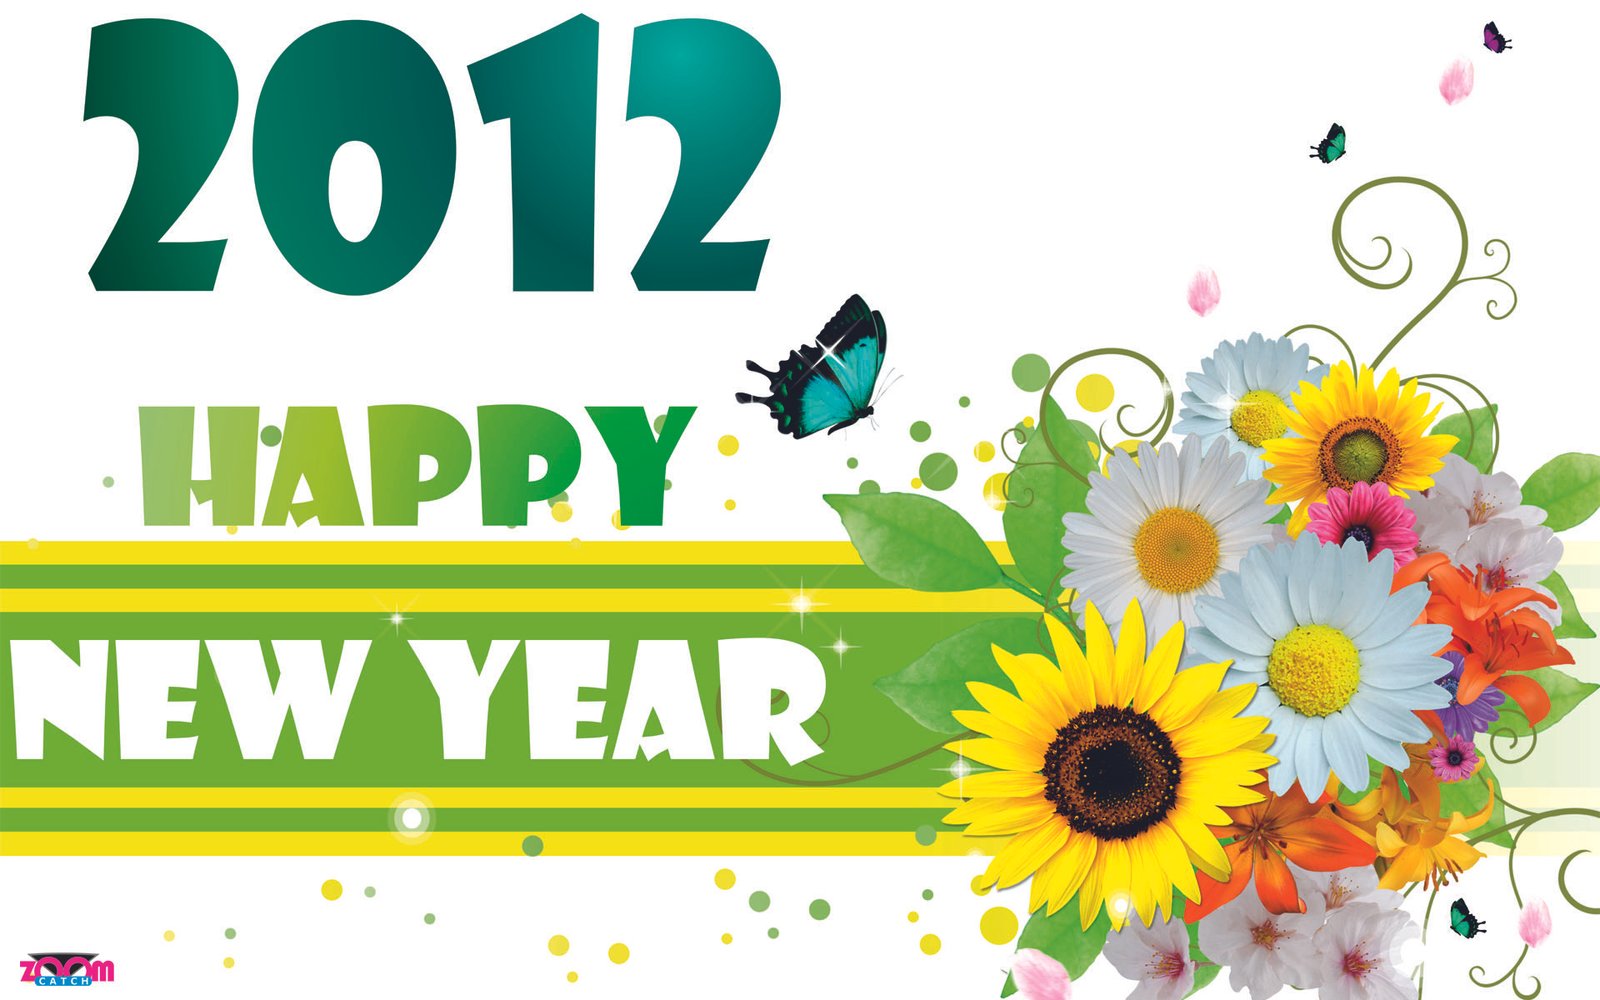 Happy-New-Year-2012-picture.jpg